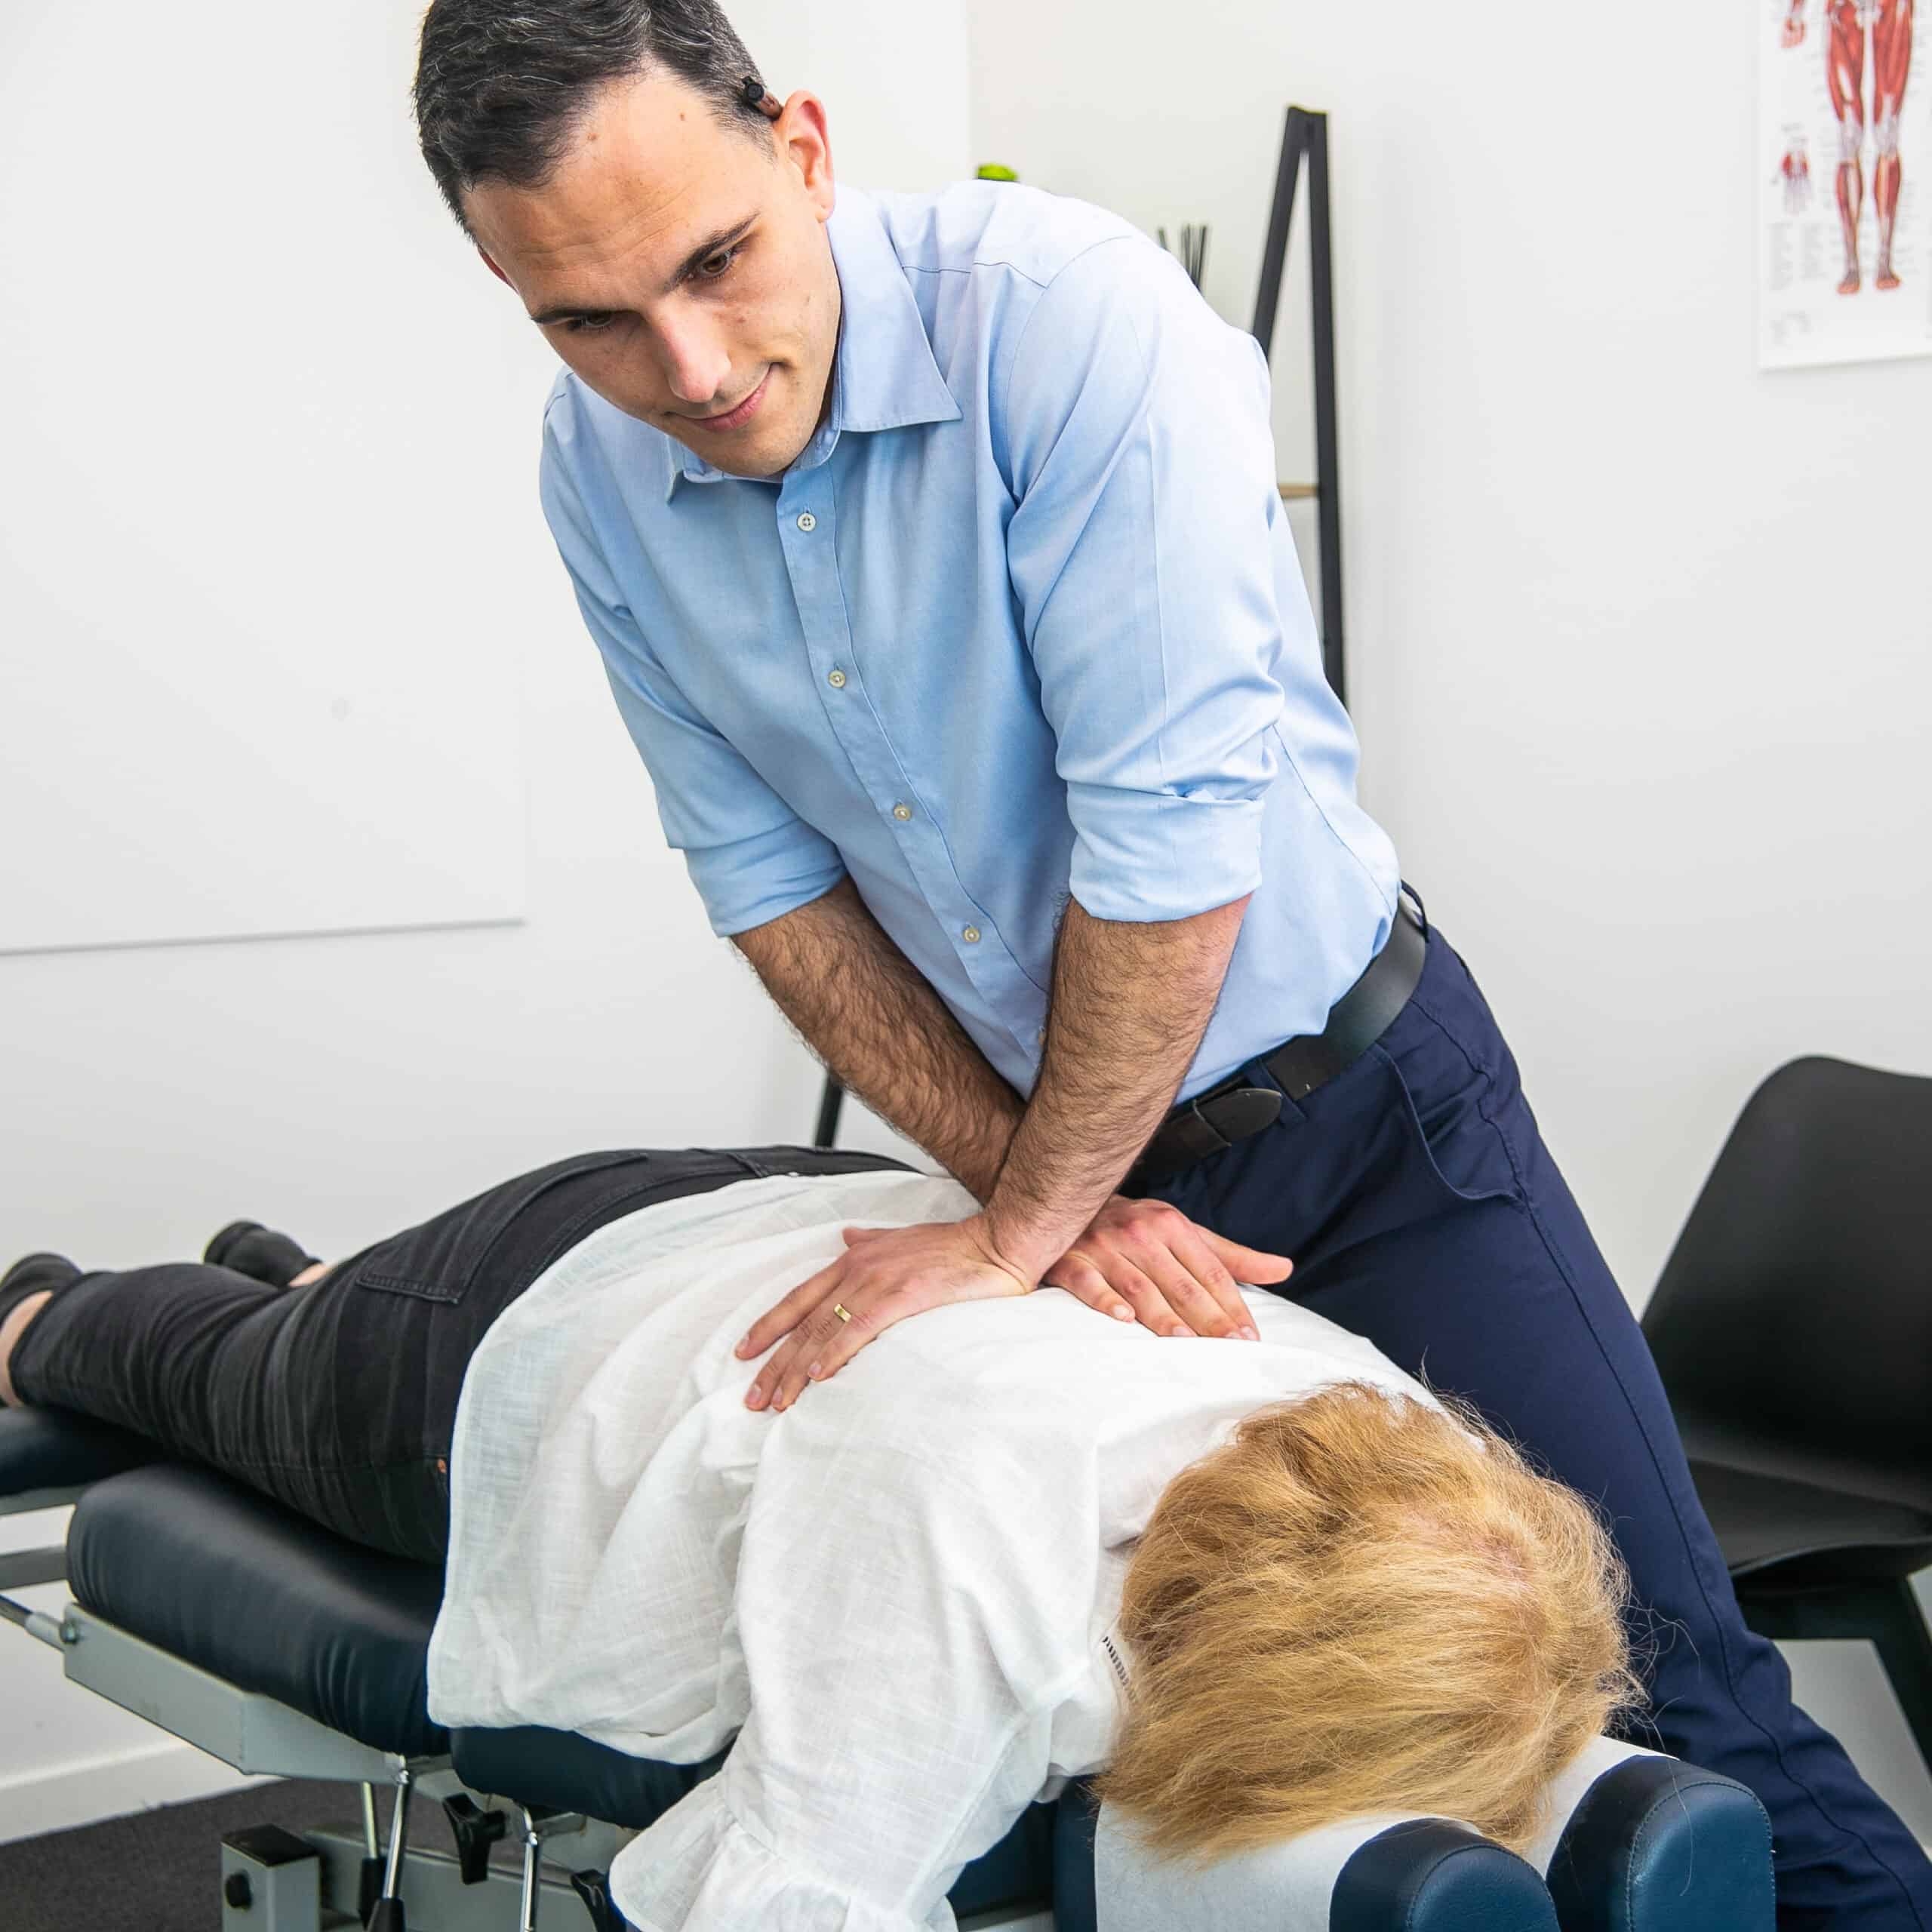 Geelong chiropractor performing manual adjustment to thoracic spine for back pain relief